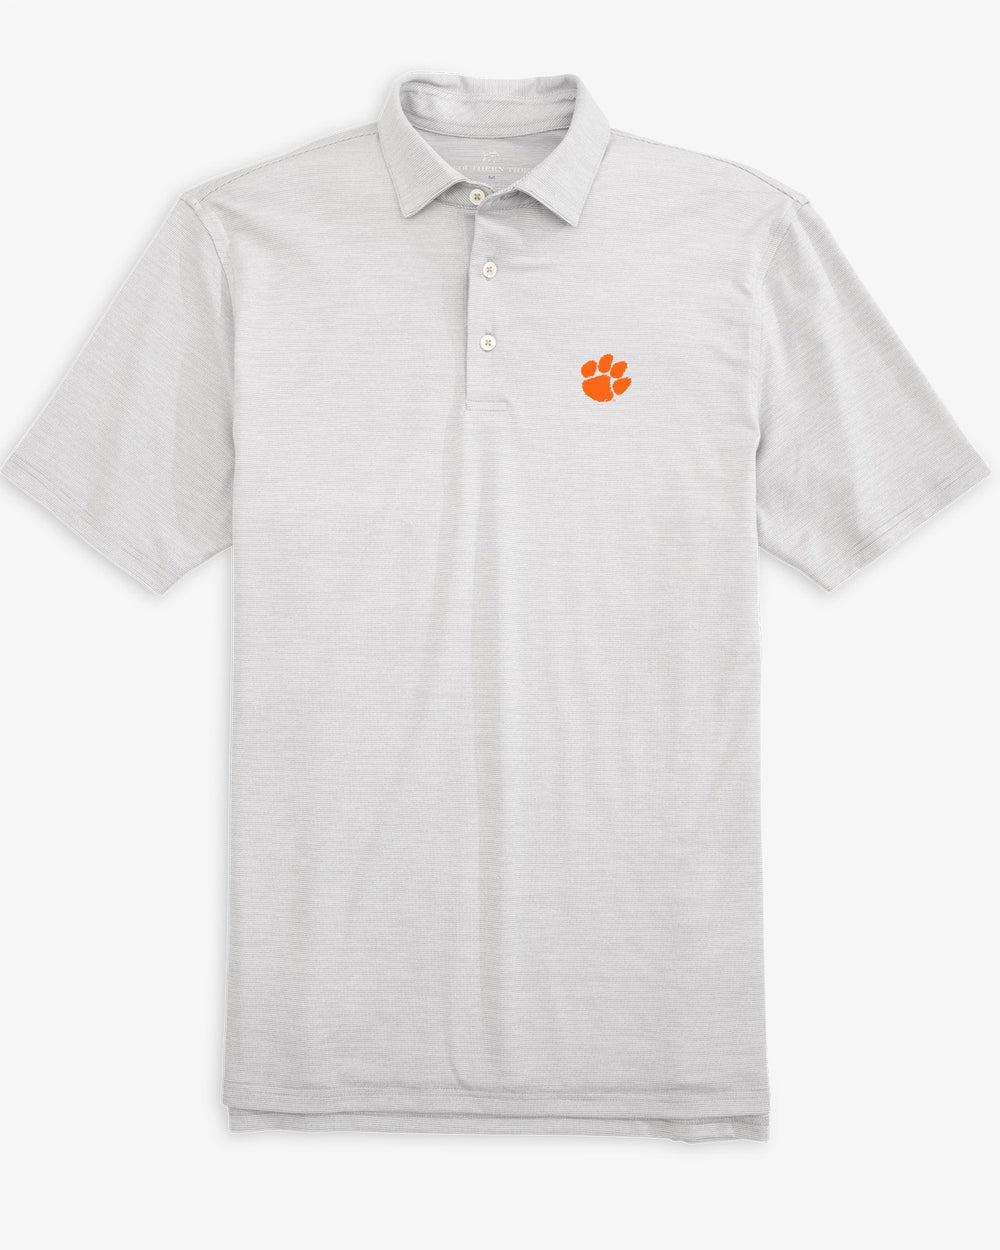 The front view of the Clemson Tigers Driver Spacedye Polo Shirt by Southern Tide - Slate Grey